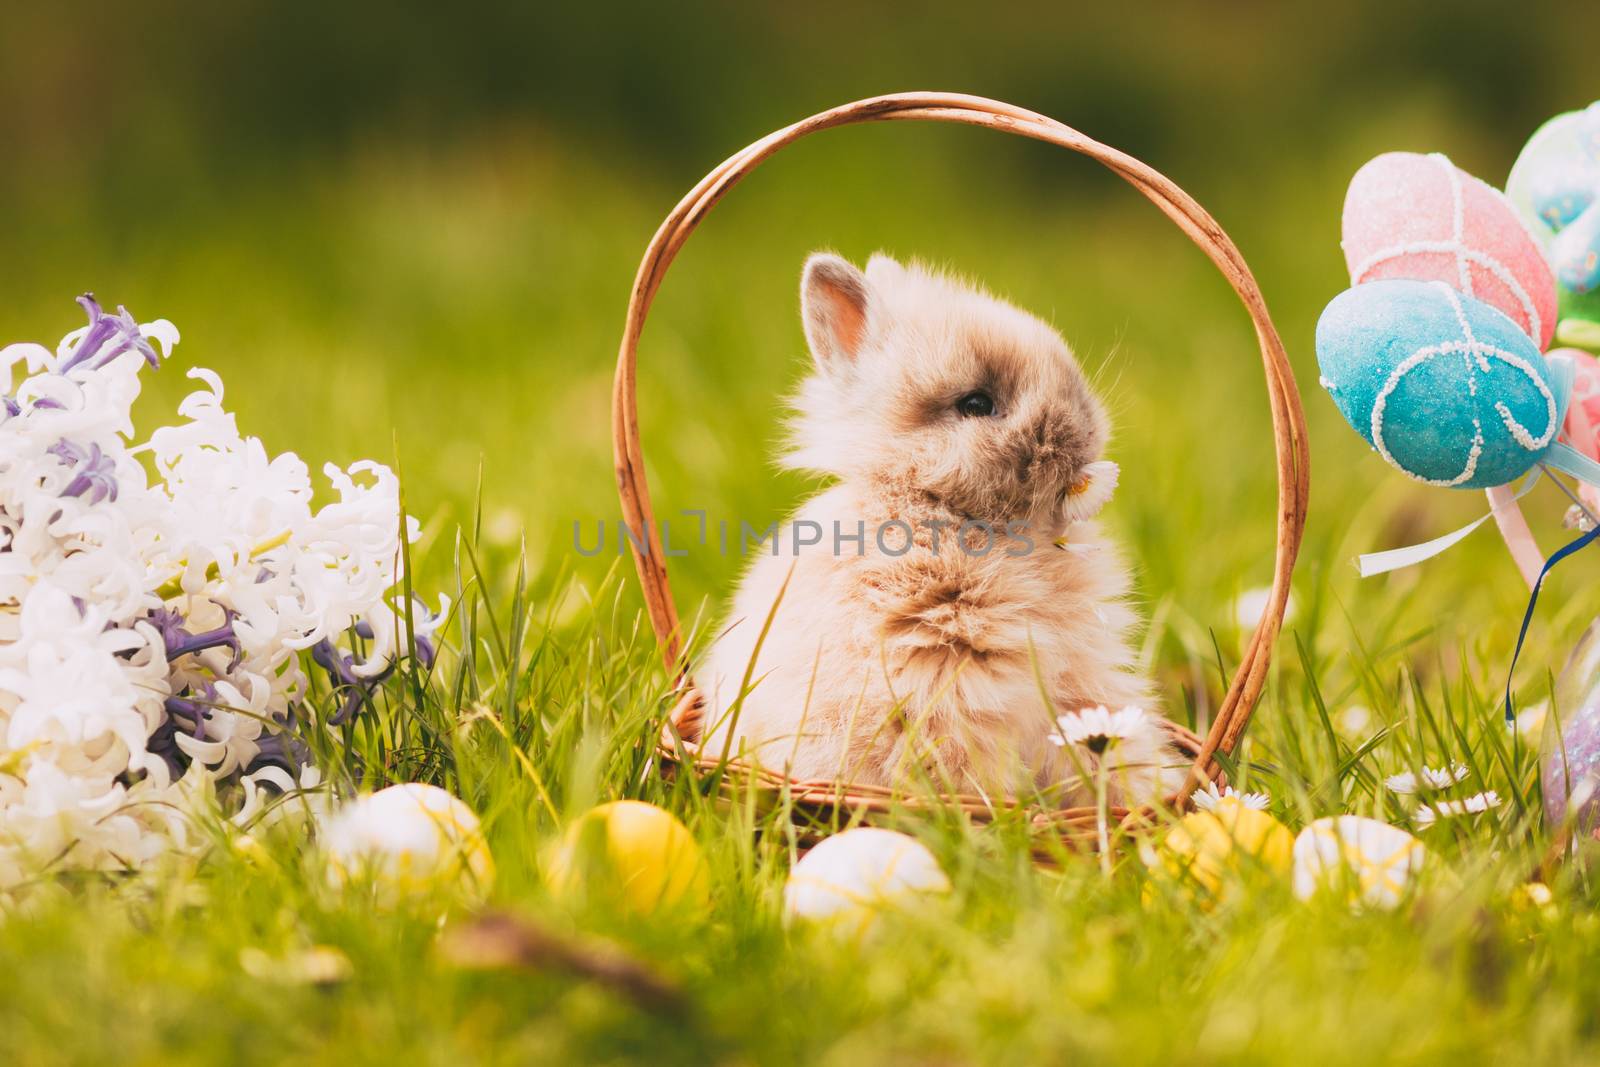 Cute little bunny in the basket on the grass with Easter eggs.